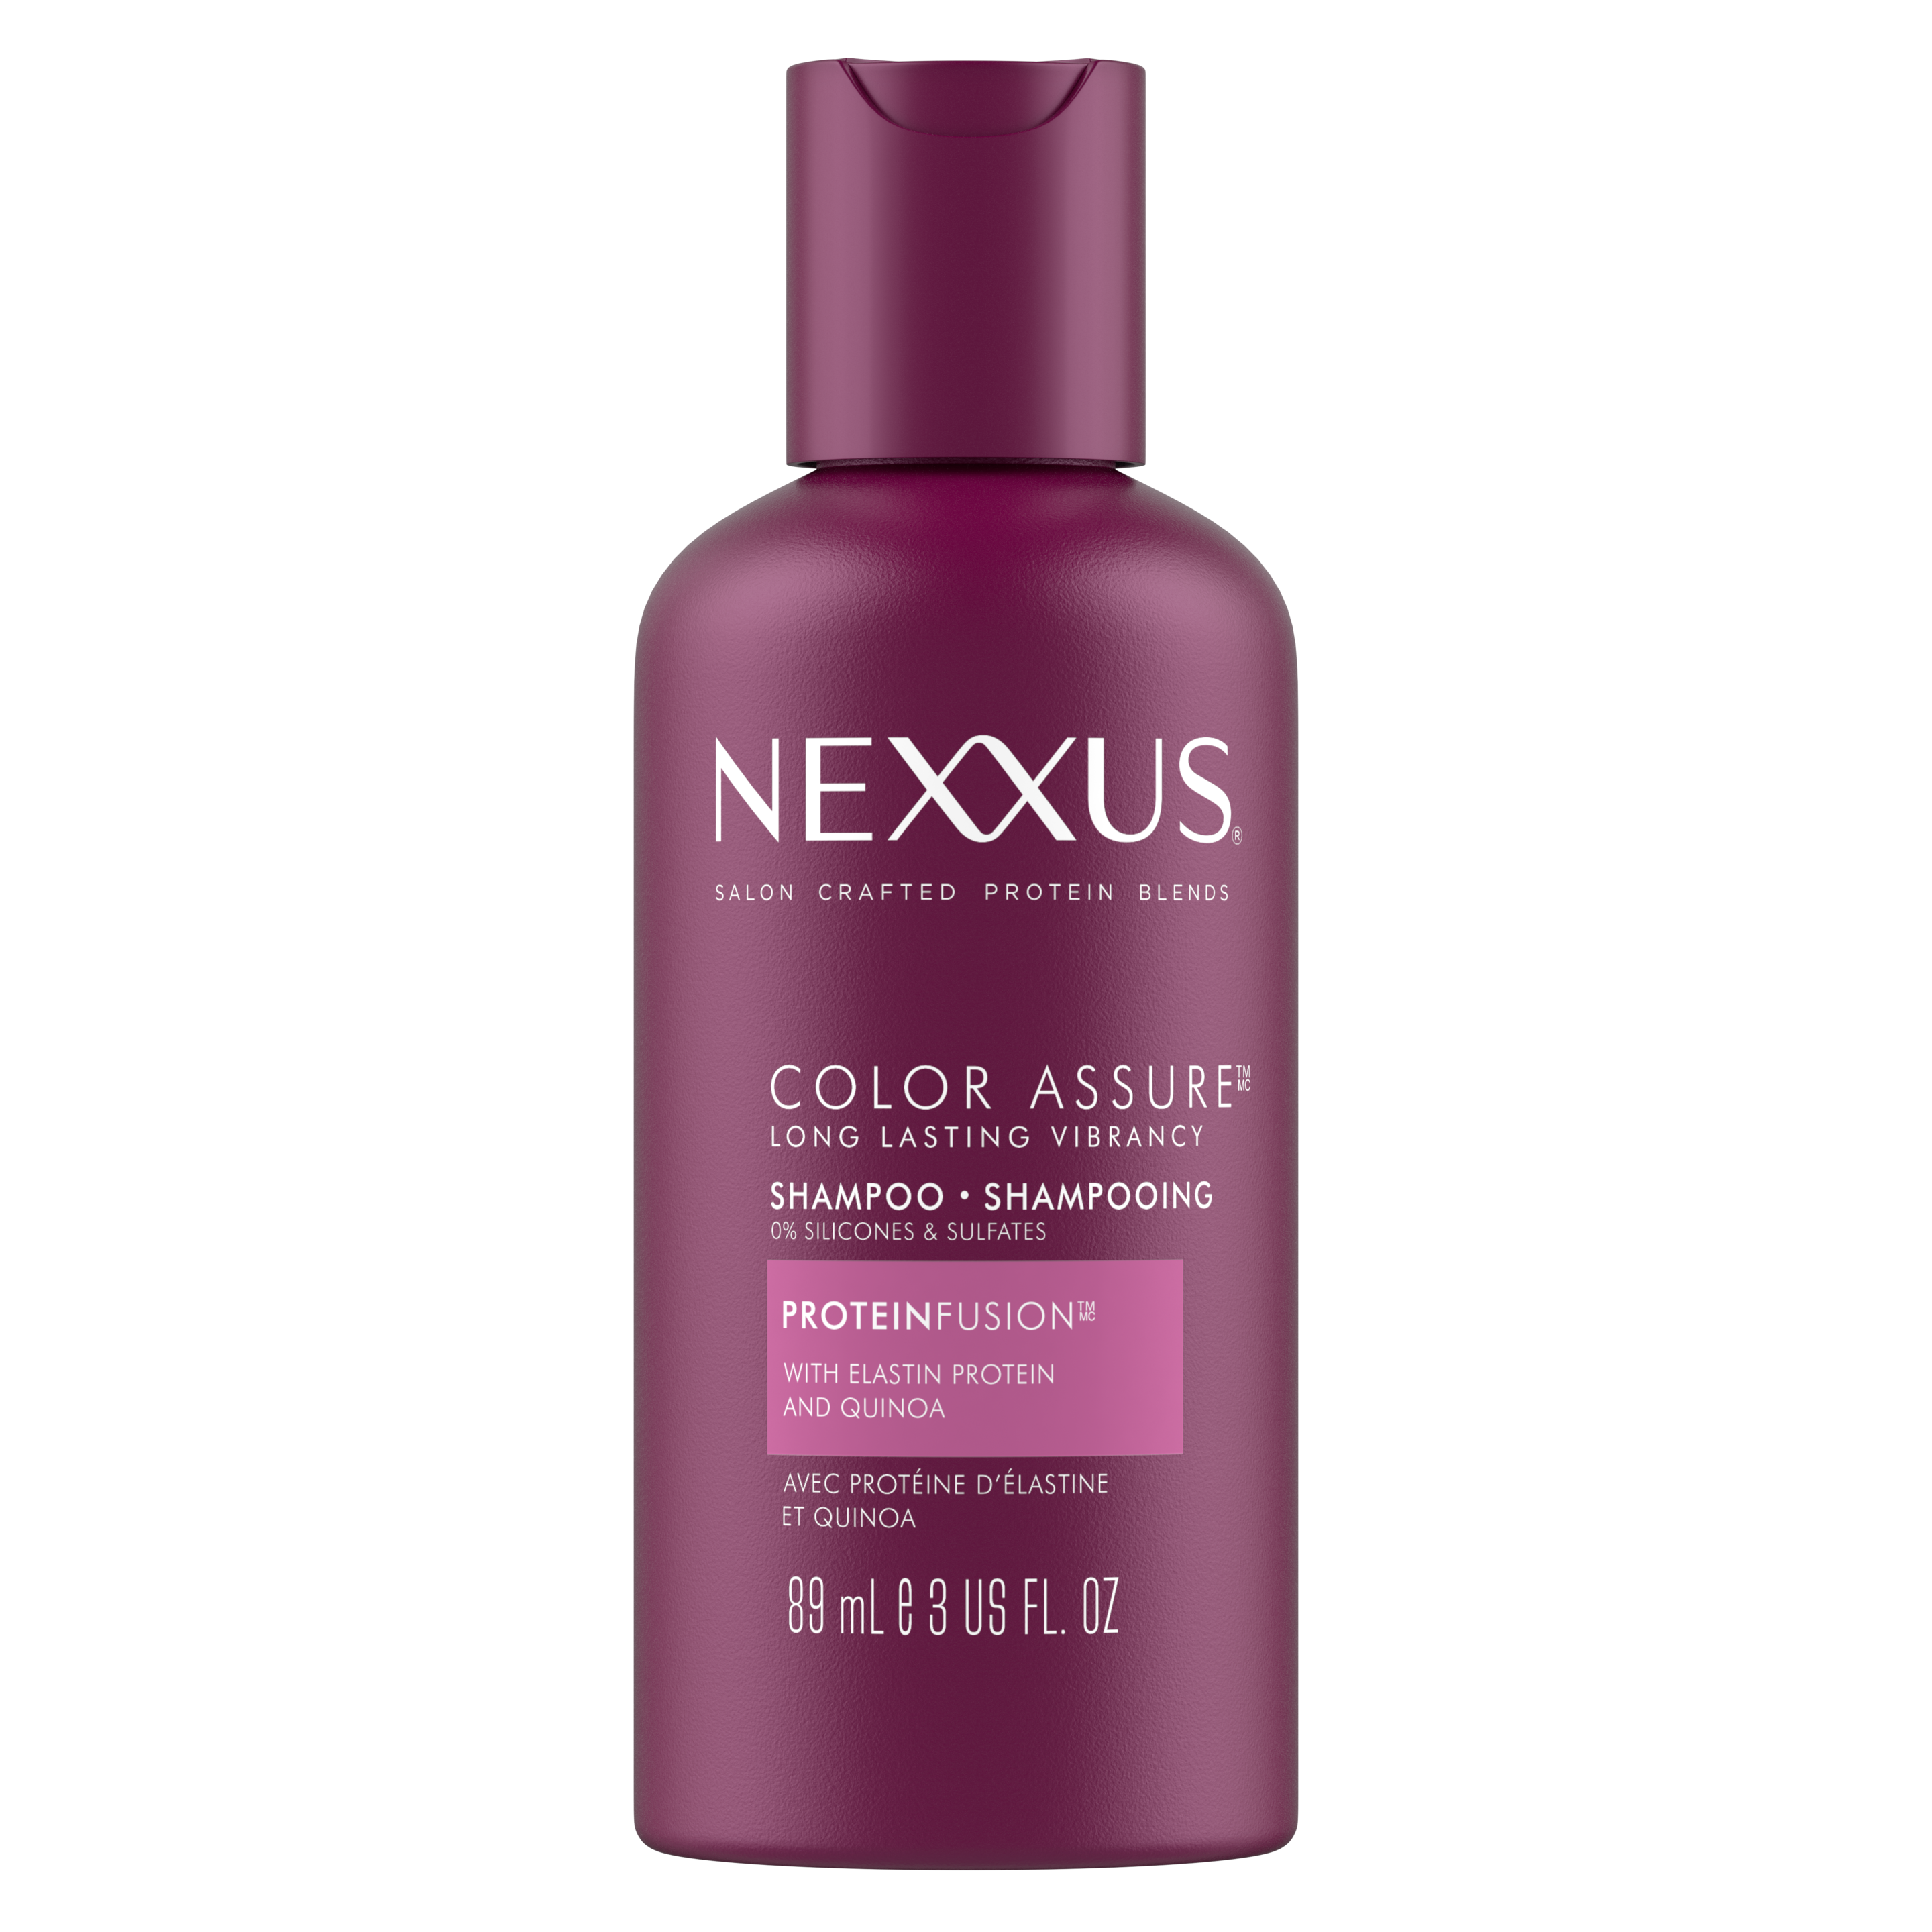 Front of shampoo pack Nexxus Color Assure Shampoo 89ml                                                                                    Hero Front of Shampoo Nexxus colour assure pack